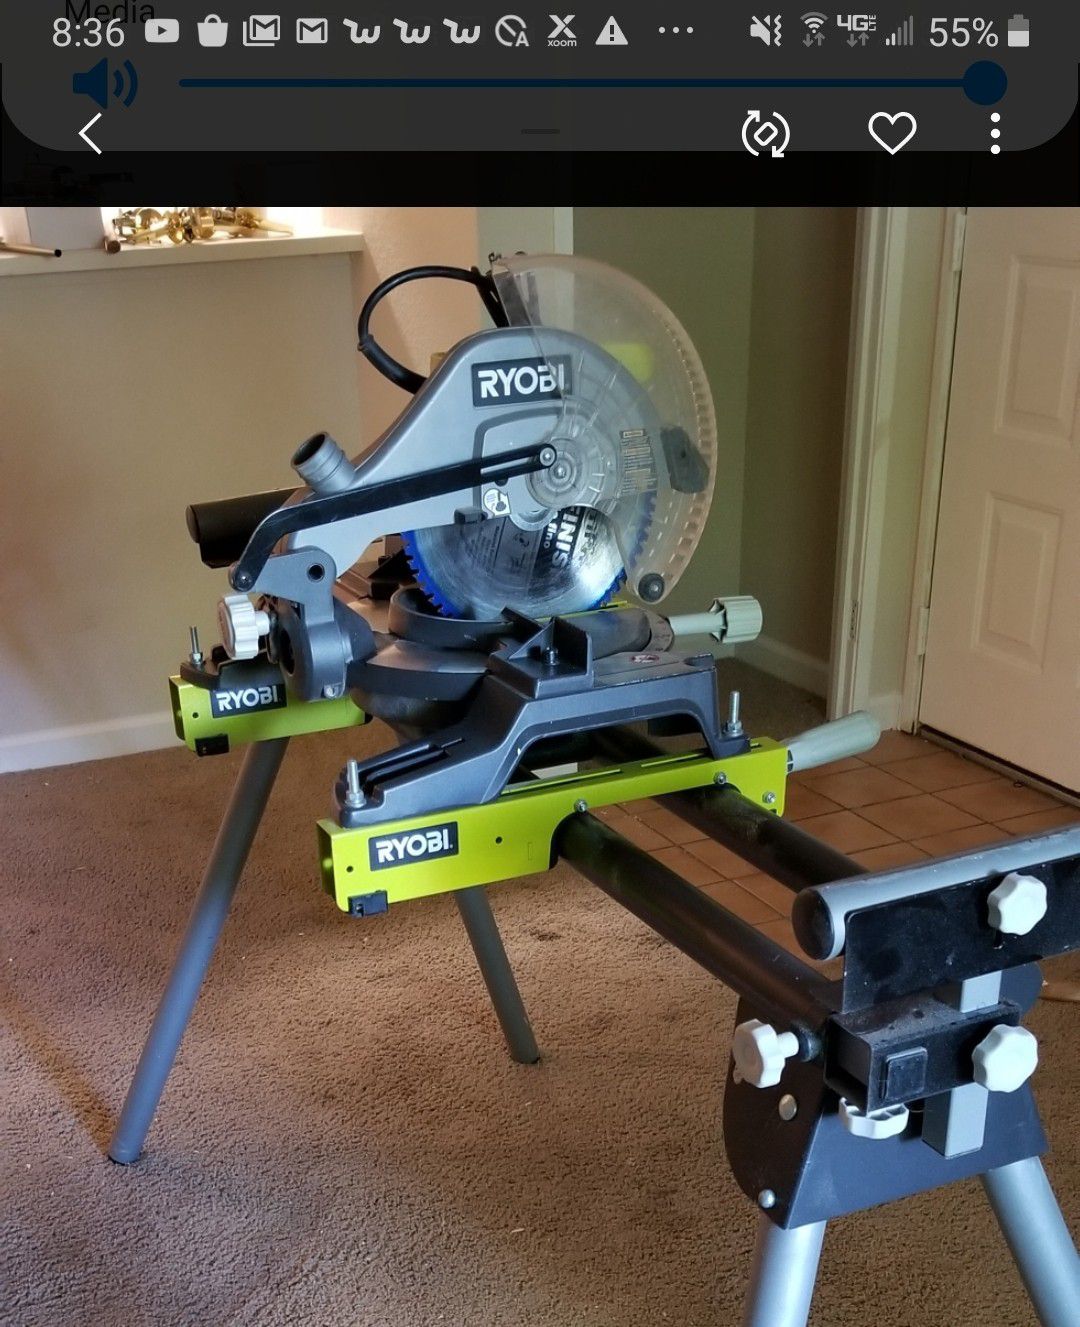 12" circle saw With the stand